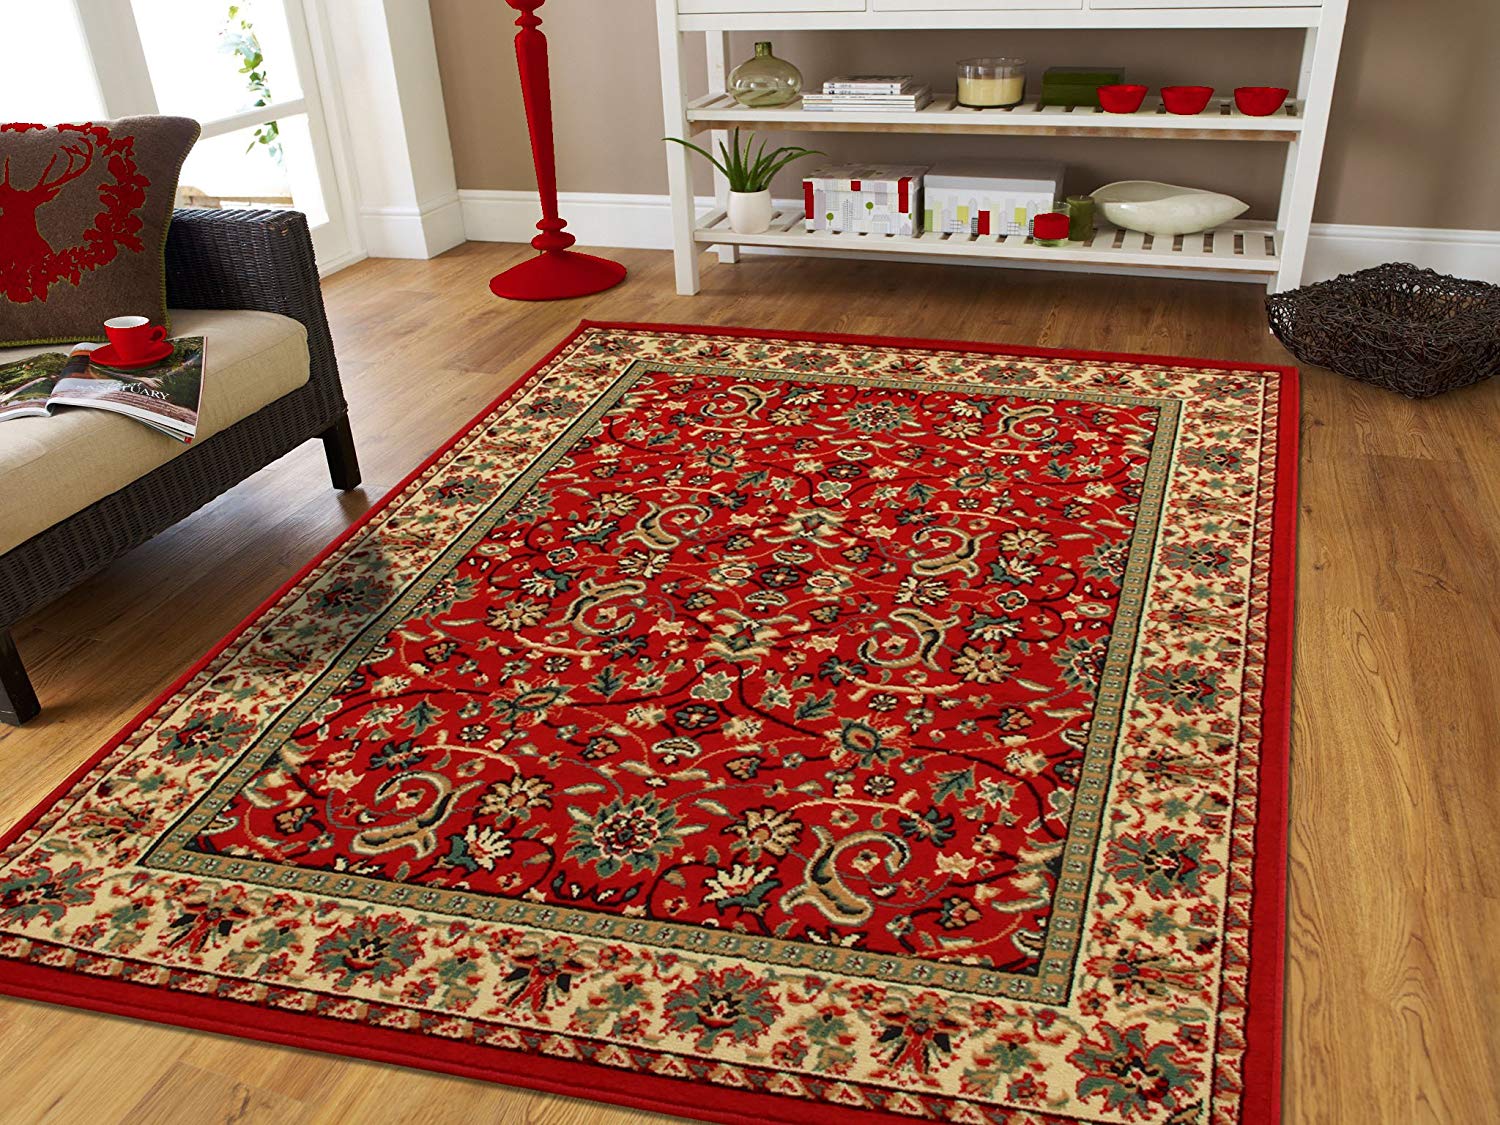 “the knowledge about persian rugs online”